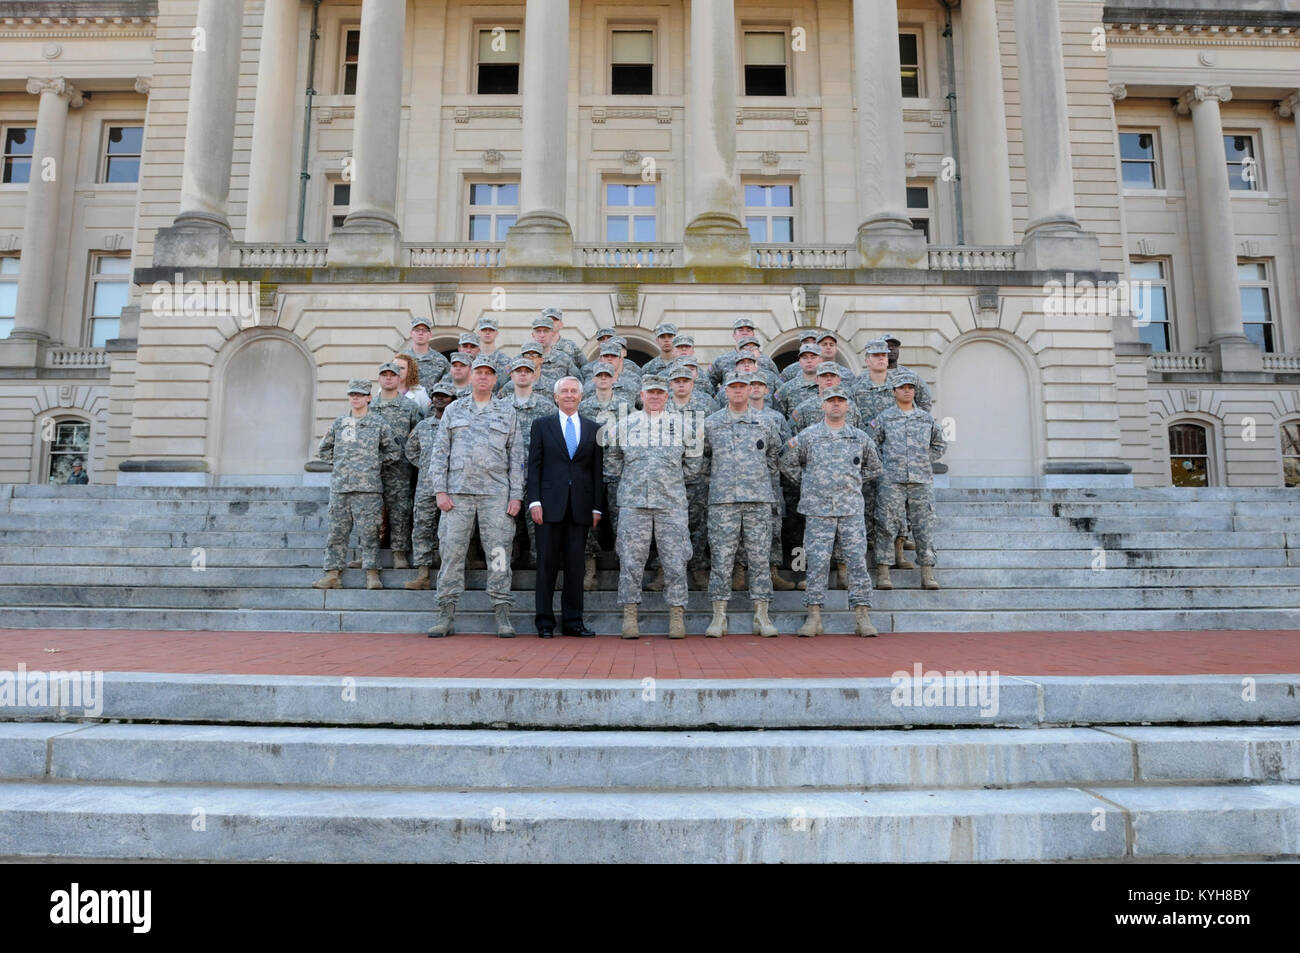 Kentucky Governor, Steve Beshear and the Adjutant General, Maj. Gen. Edward W. Tonini, join new Kentucky Guard recruits on the steps of the State Capitol in Frankfort, Ky., Nov. 20, 2012. (Kentucky National Guard photo by Sgt. Scott Raymond) Stock Photo